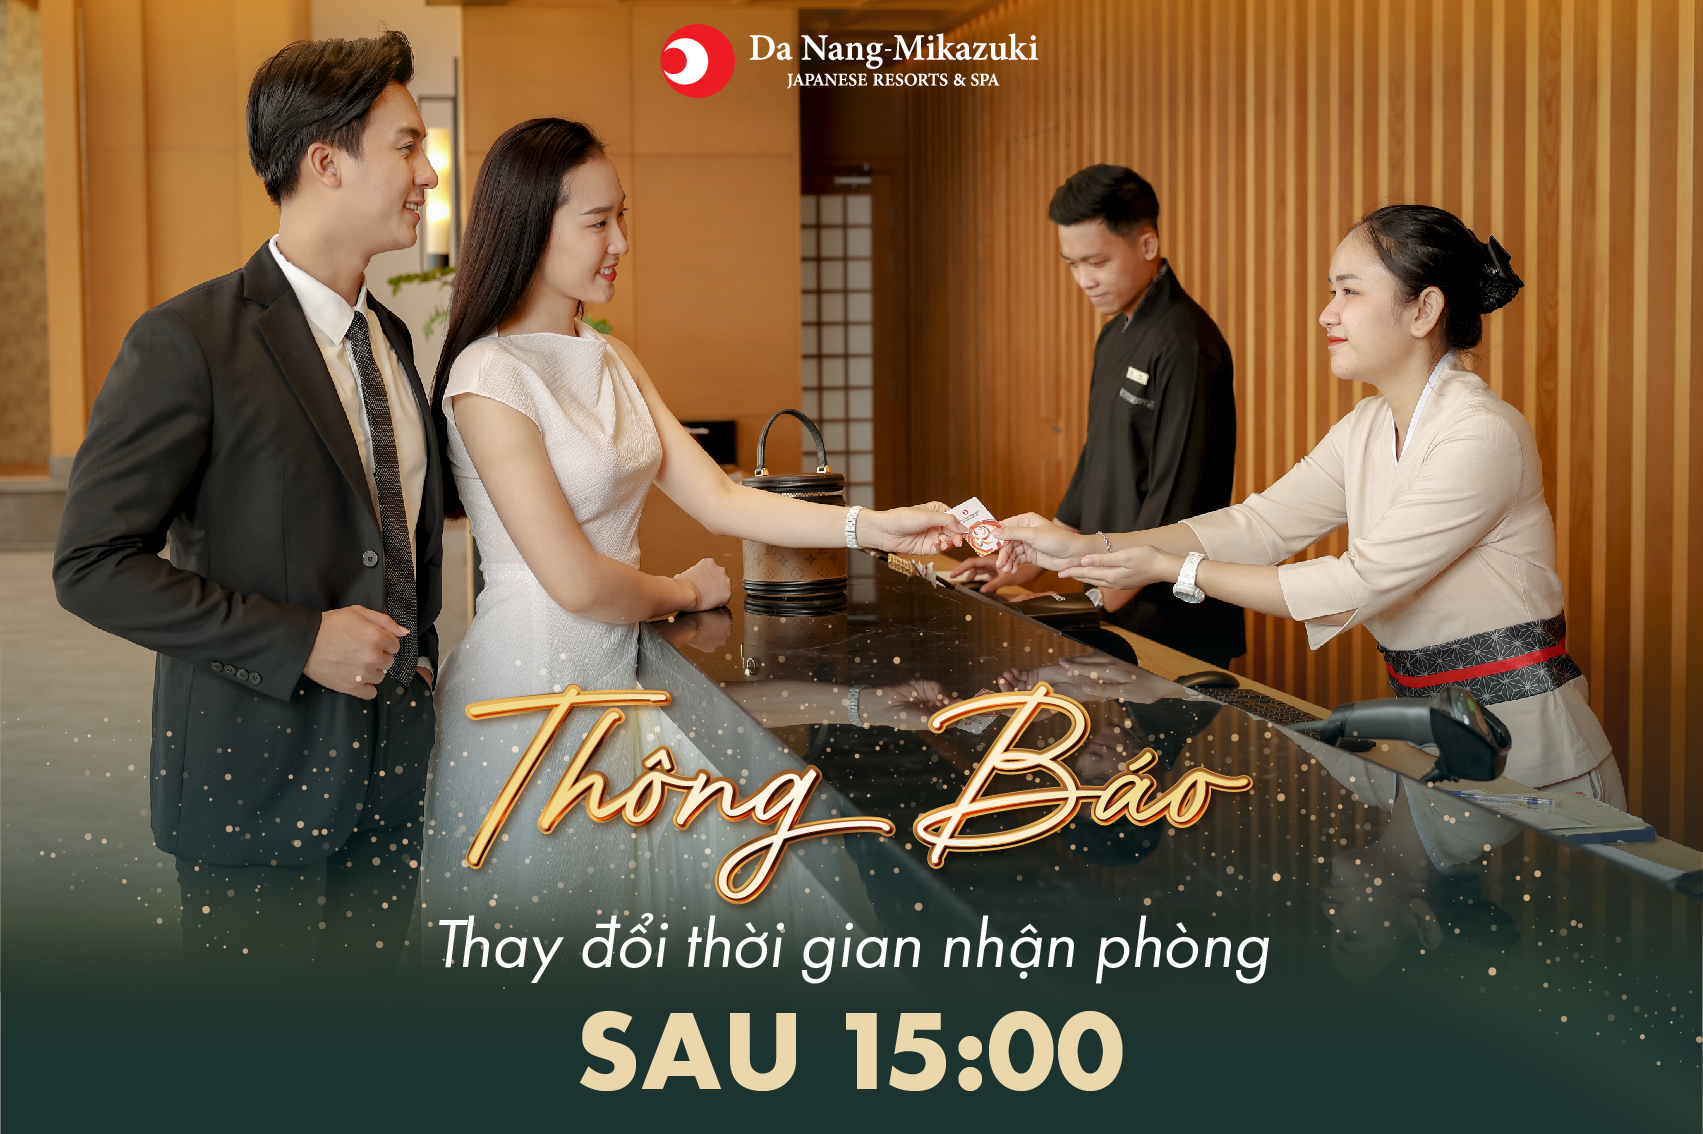 Da Nang Mikazuki Japanese Resorts & Spa is pleased to announce that Check-in time at Mikazuki hotel and Hinode villa will be changed from June 15th, 2022